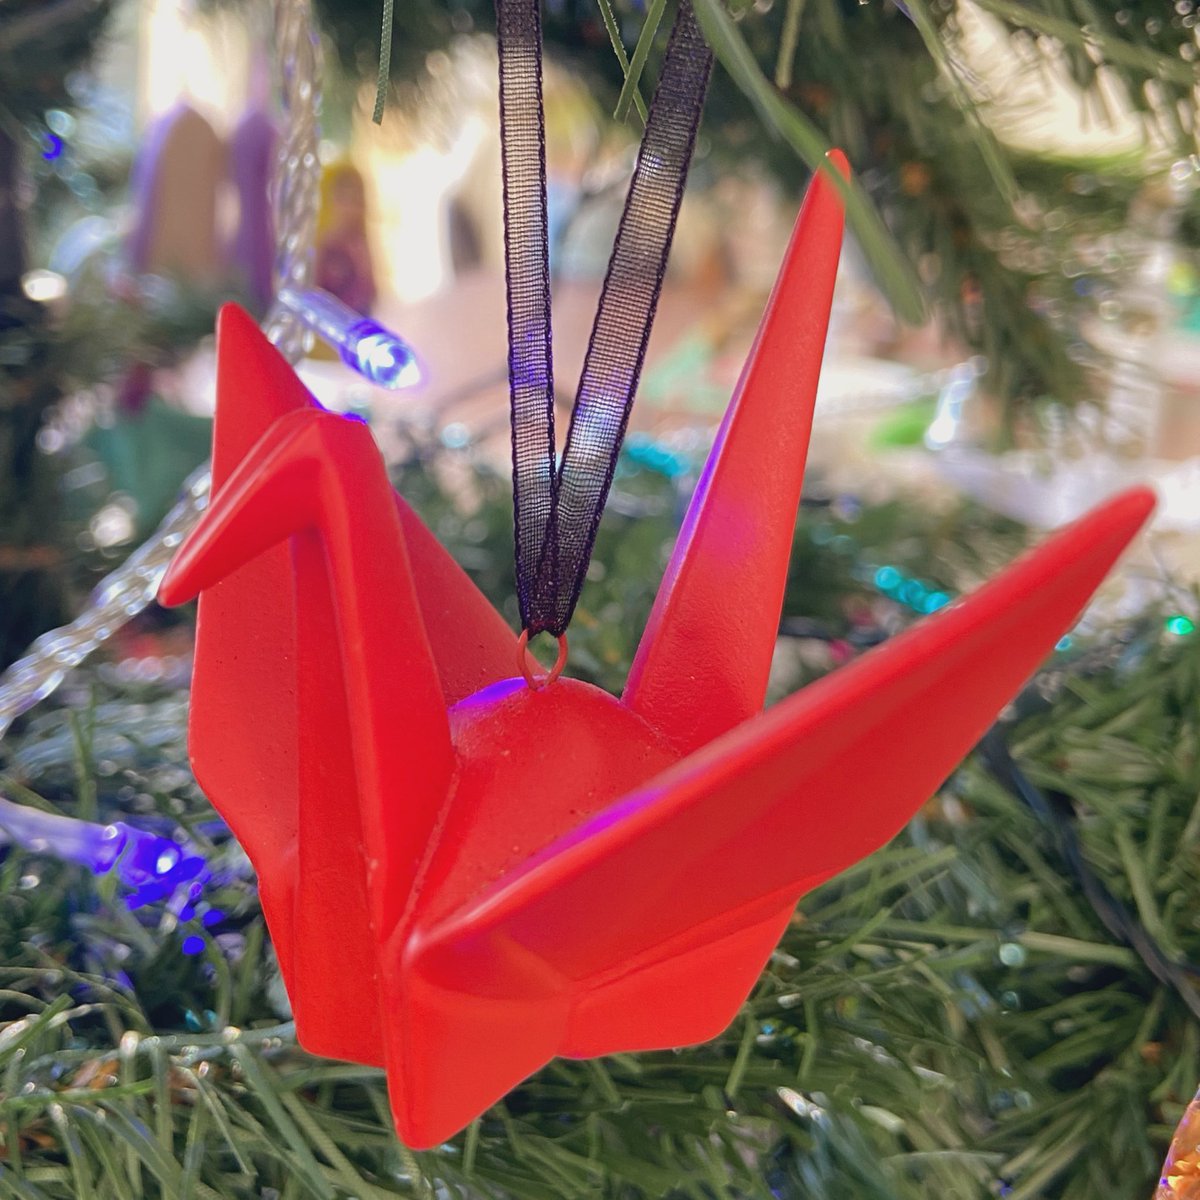 This one’s a paper crane, but made of porcelain. So pretty 